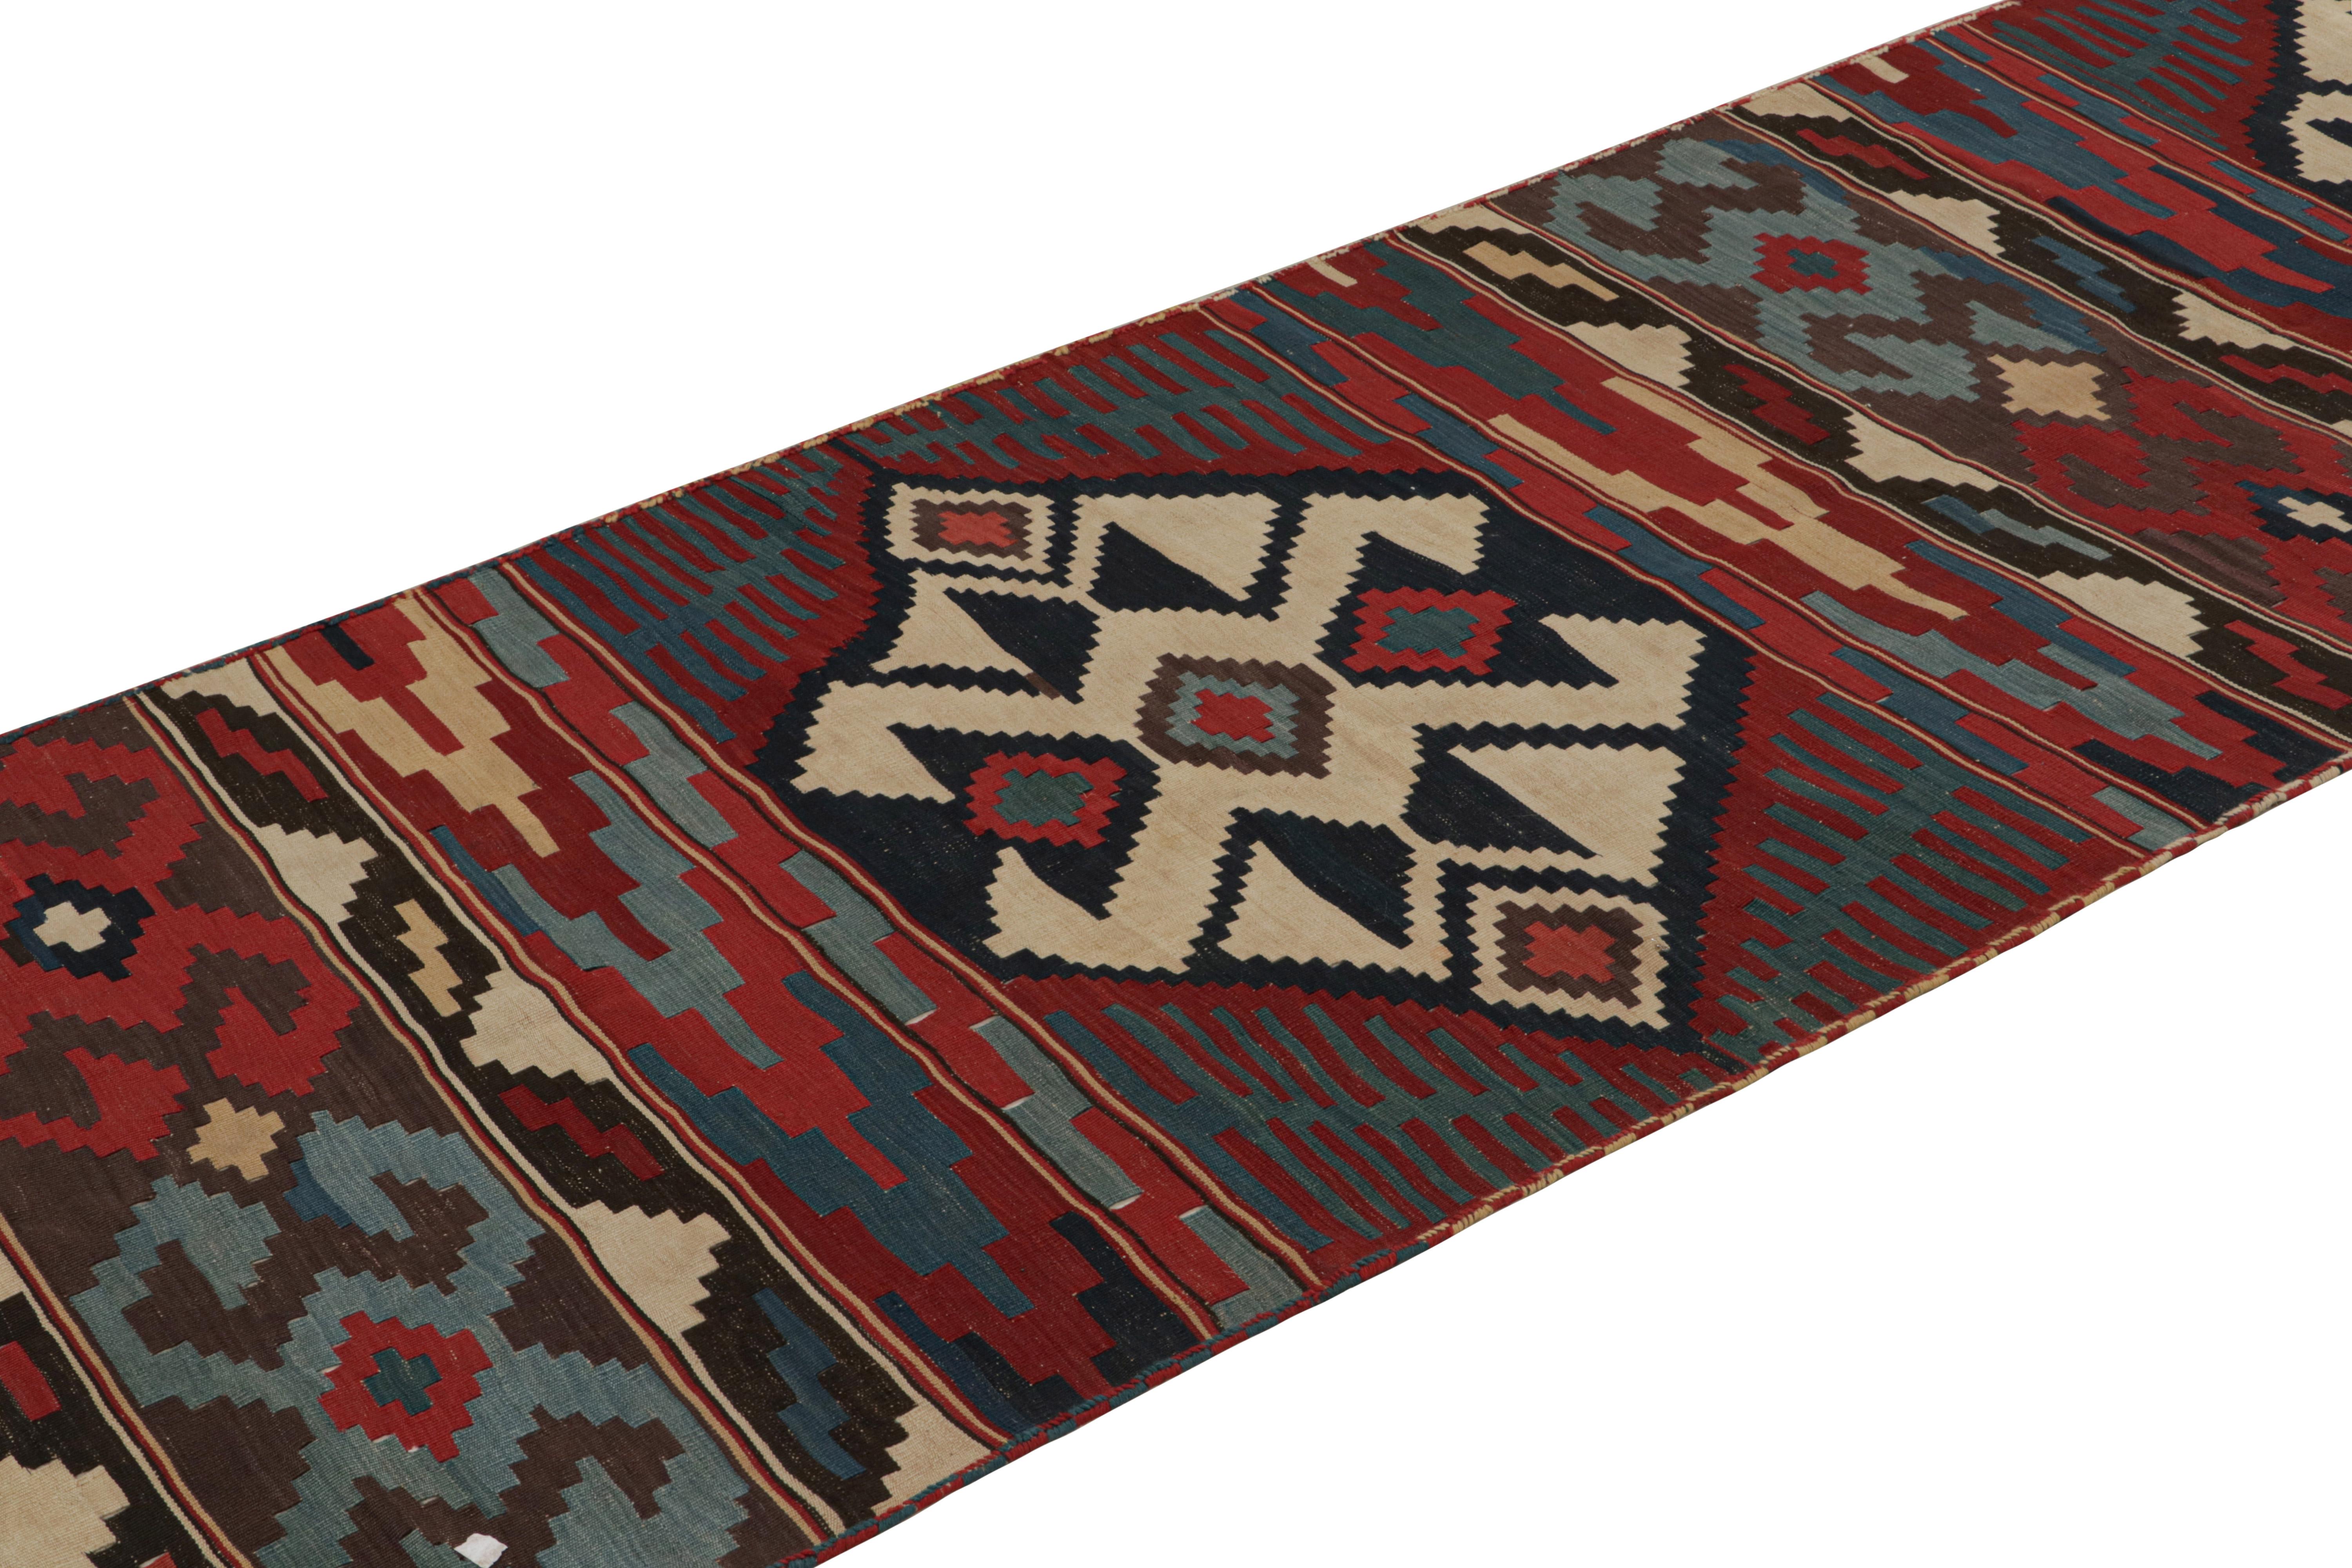 Hand-Knotted Twin Vintage Persian Kilim Runner Rugs with Geometric Patterns For Sale